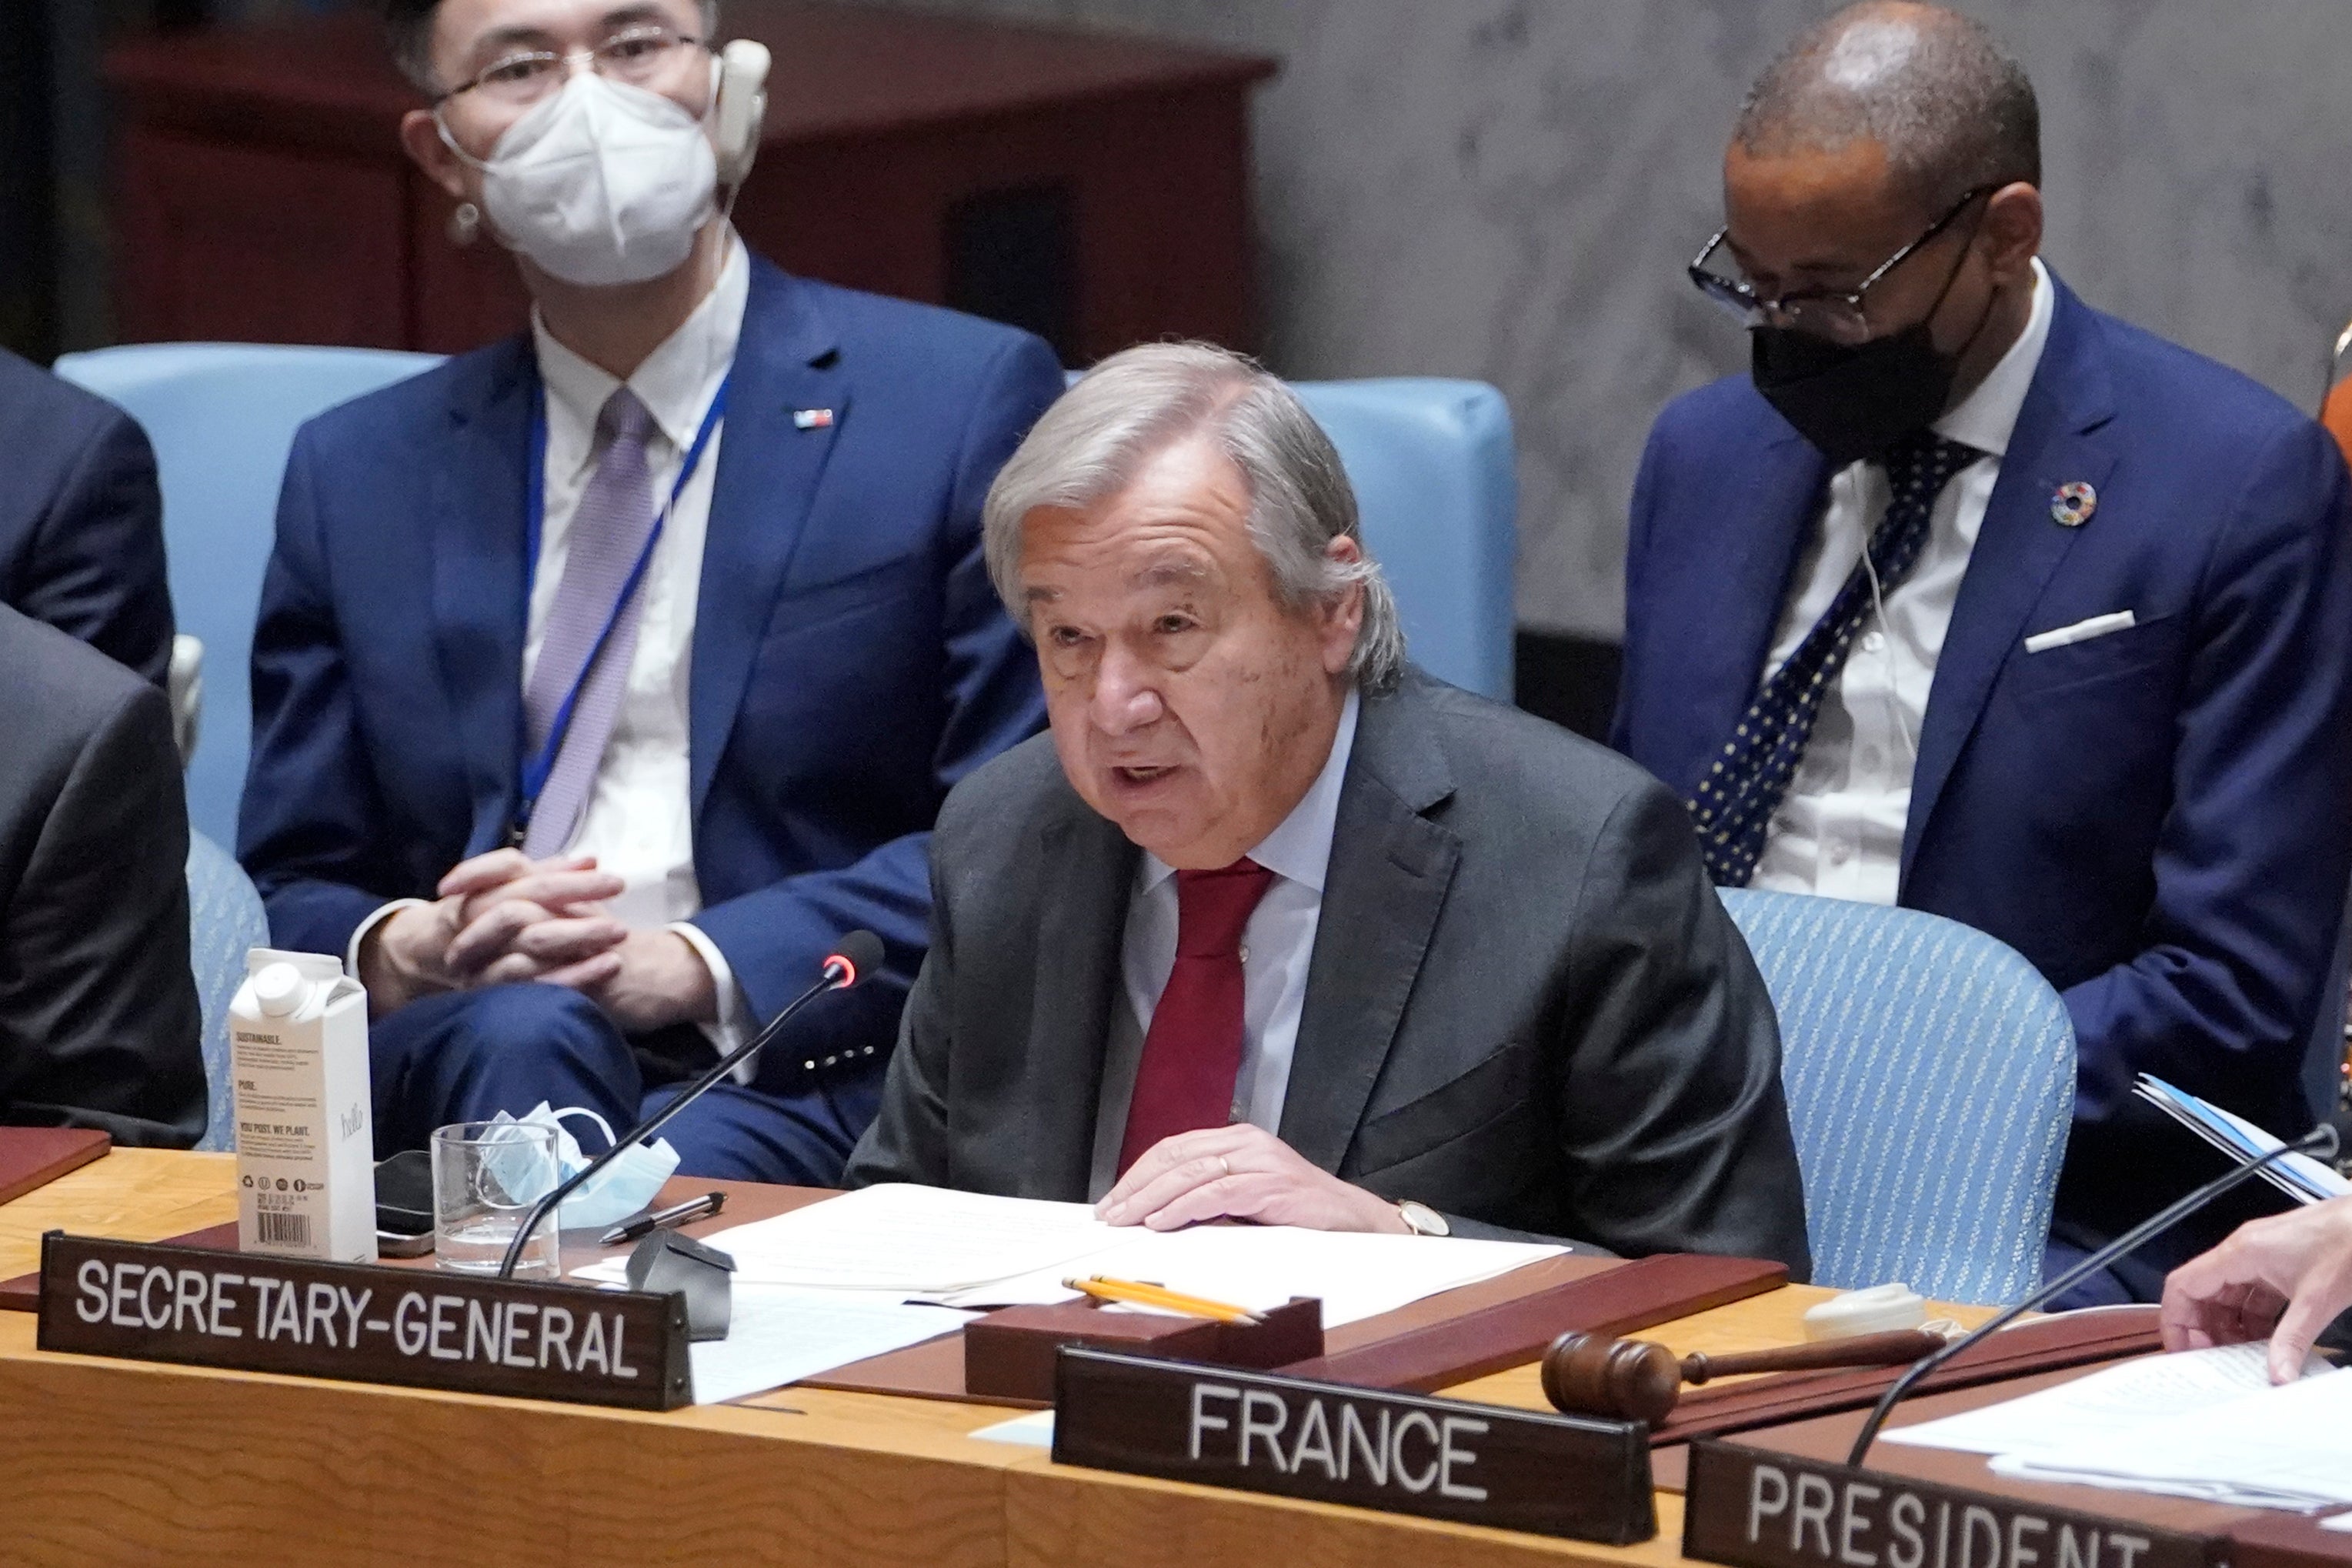 UN Secretary-General António Guterres supports the right to a healthy environment